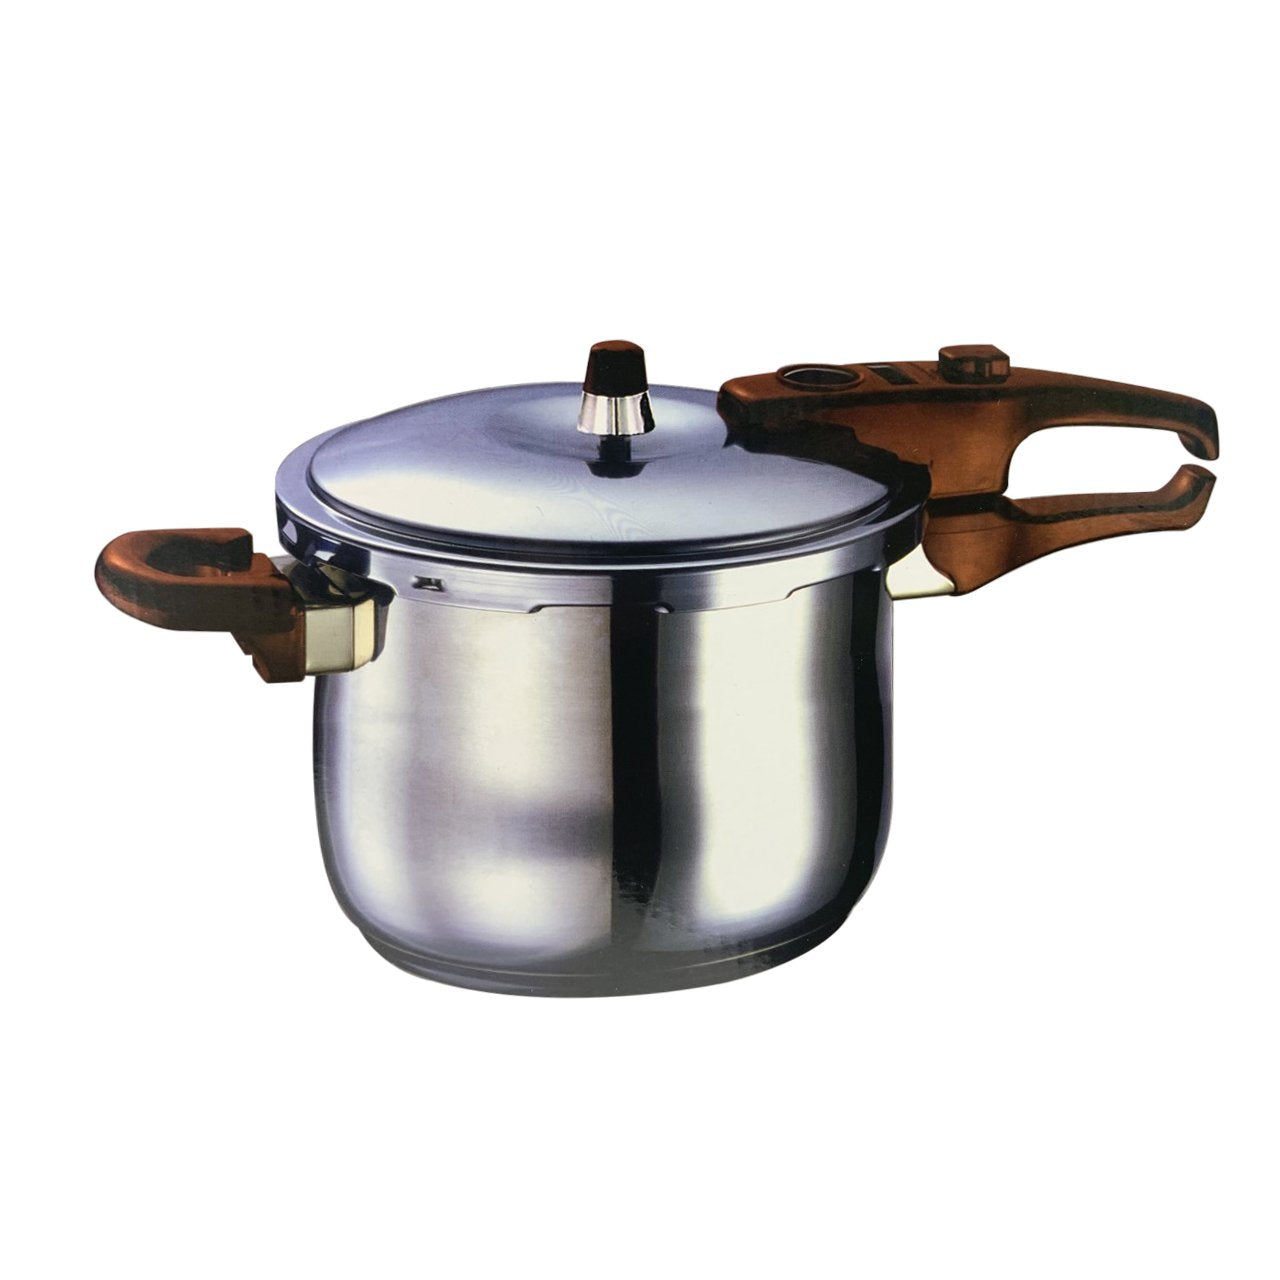 Pressure Cooker 9 Liter 18/10 Stainless Steel by Carl Weill. - Royal Gift